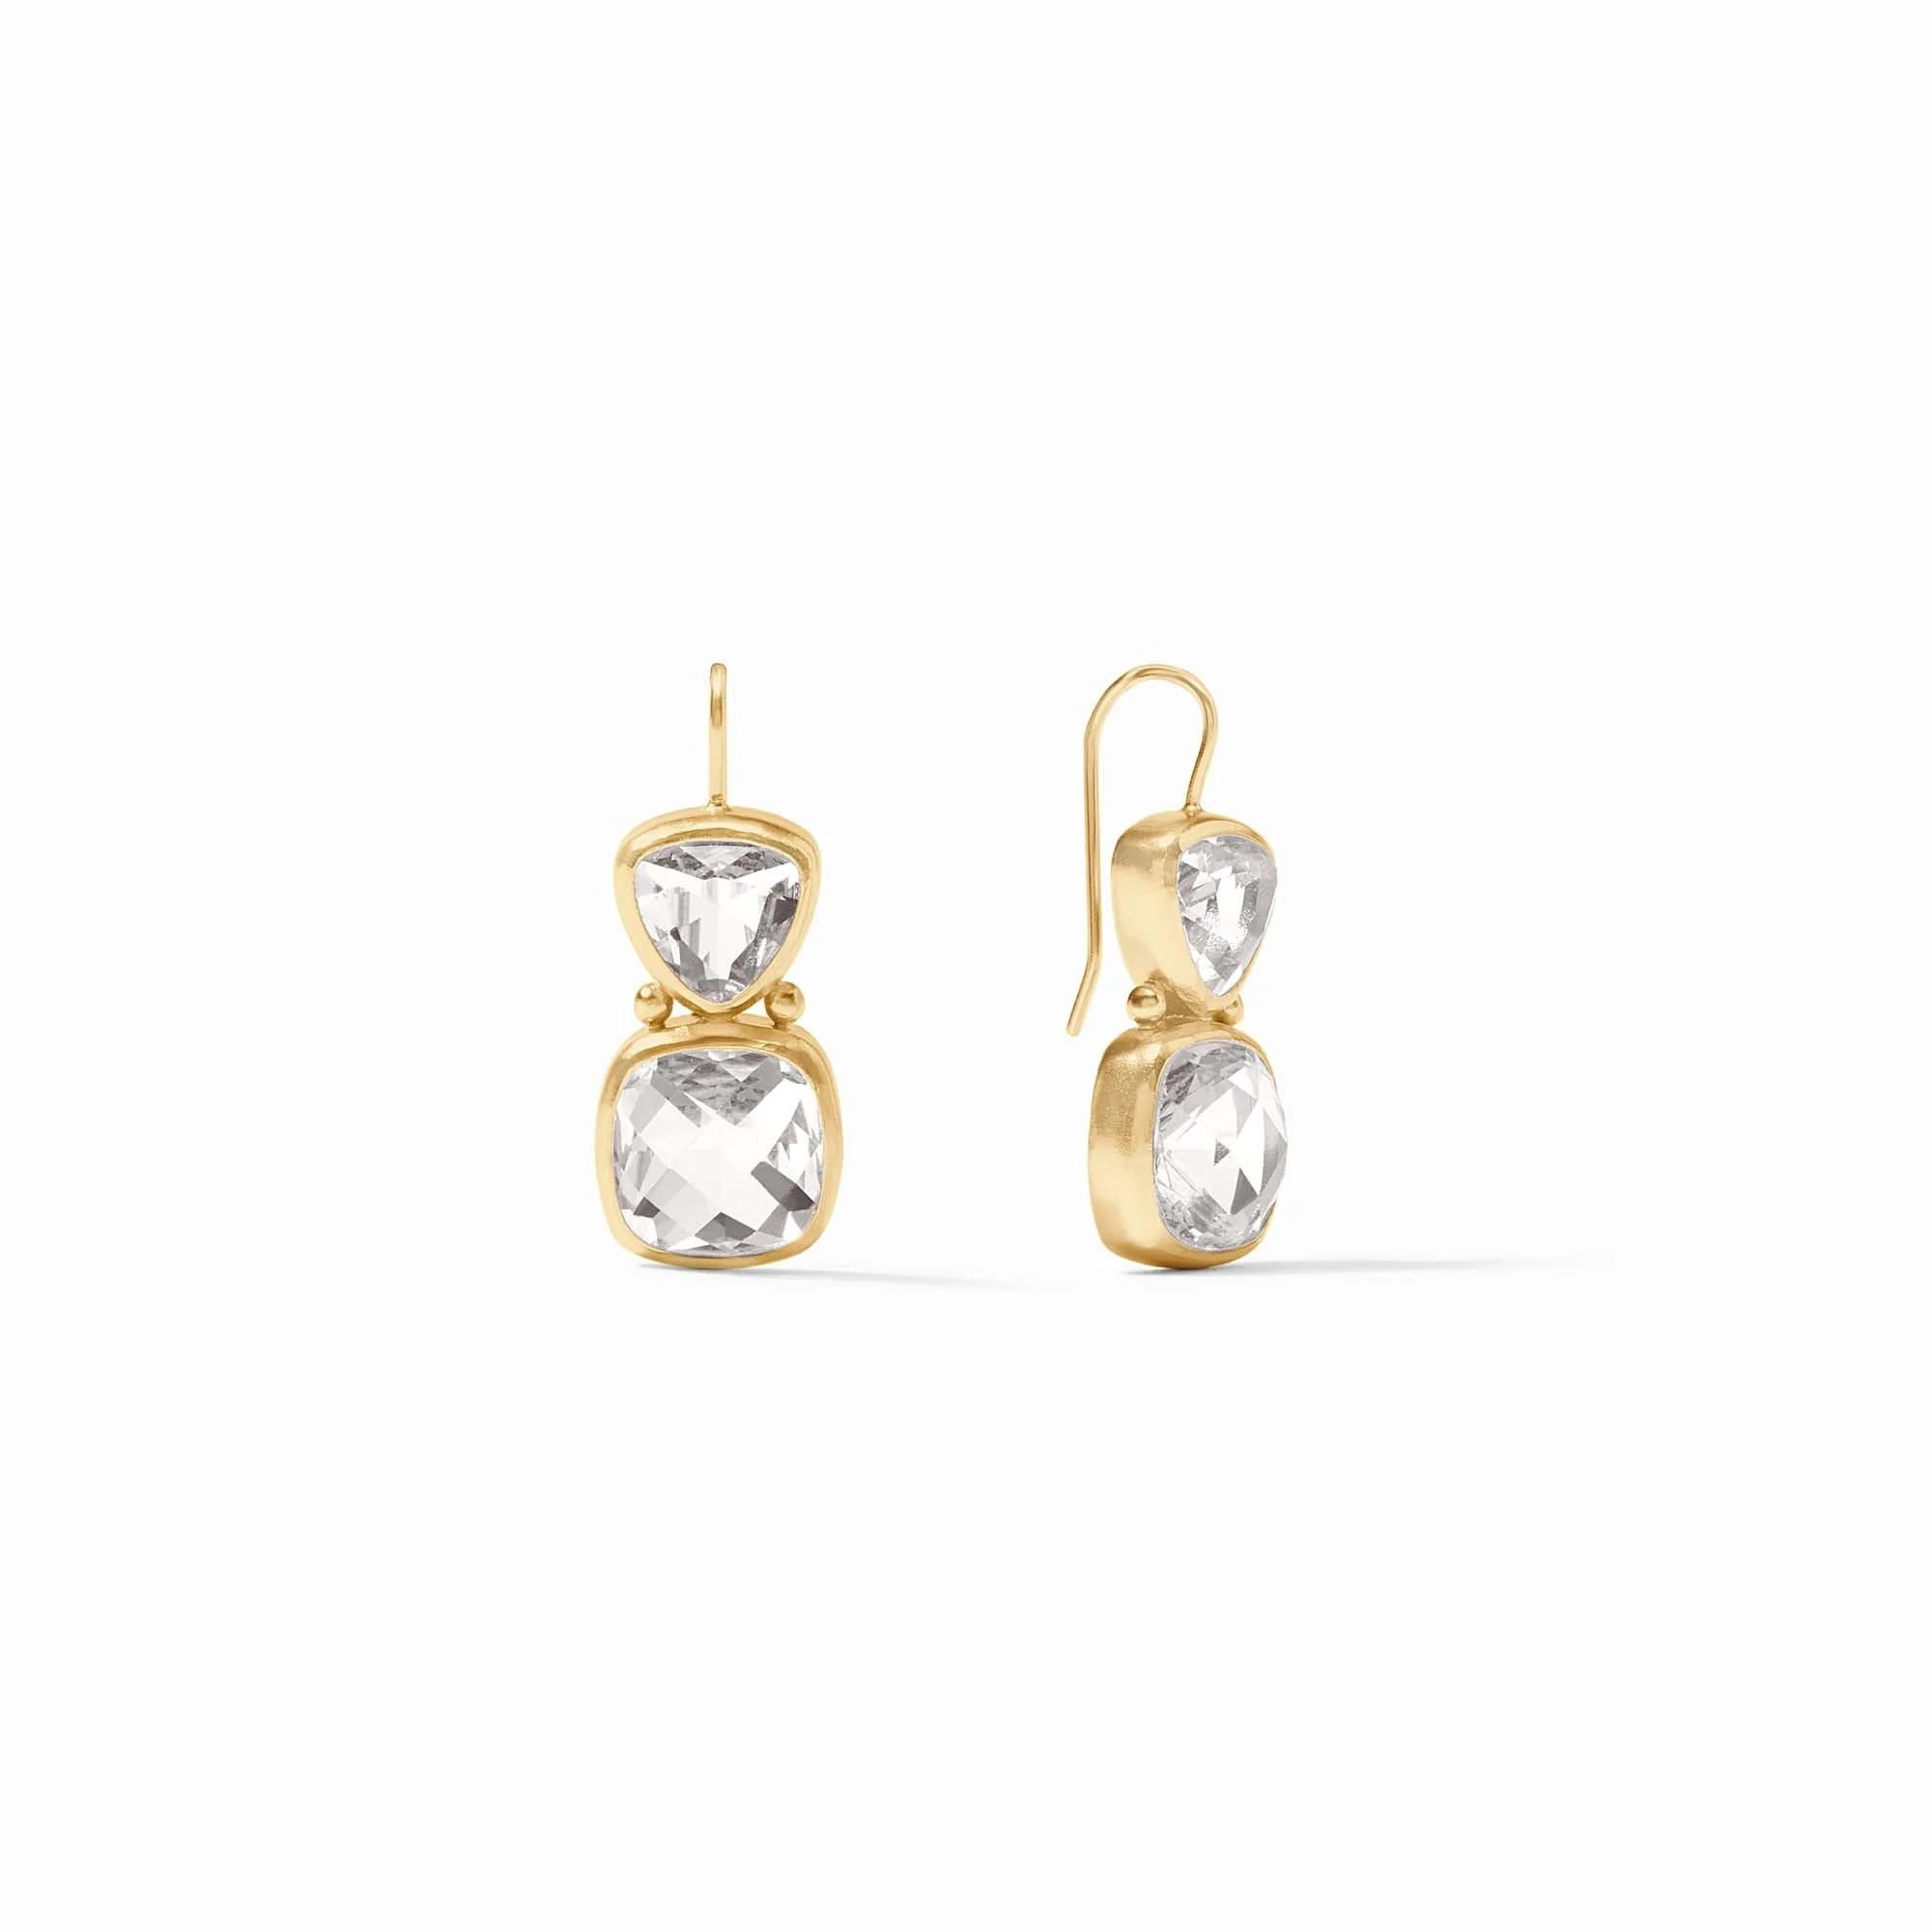 Julie Vos Aquitaine Earring - (two colors)